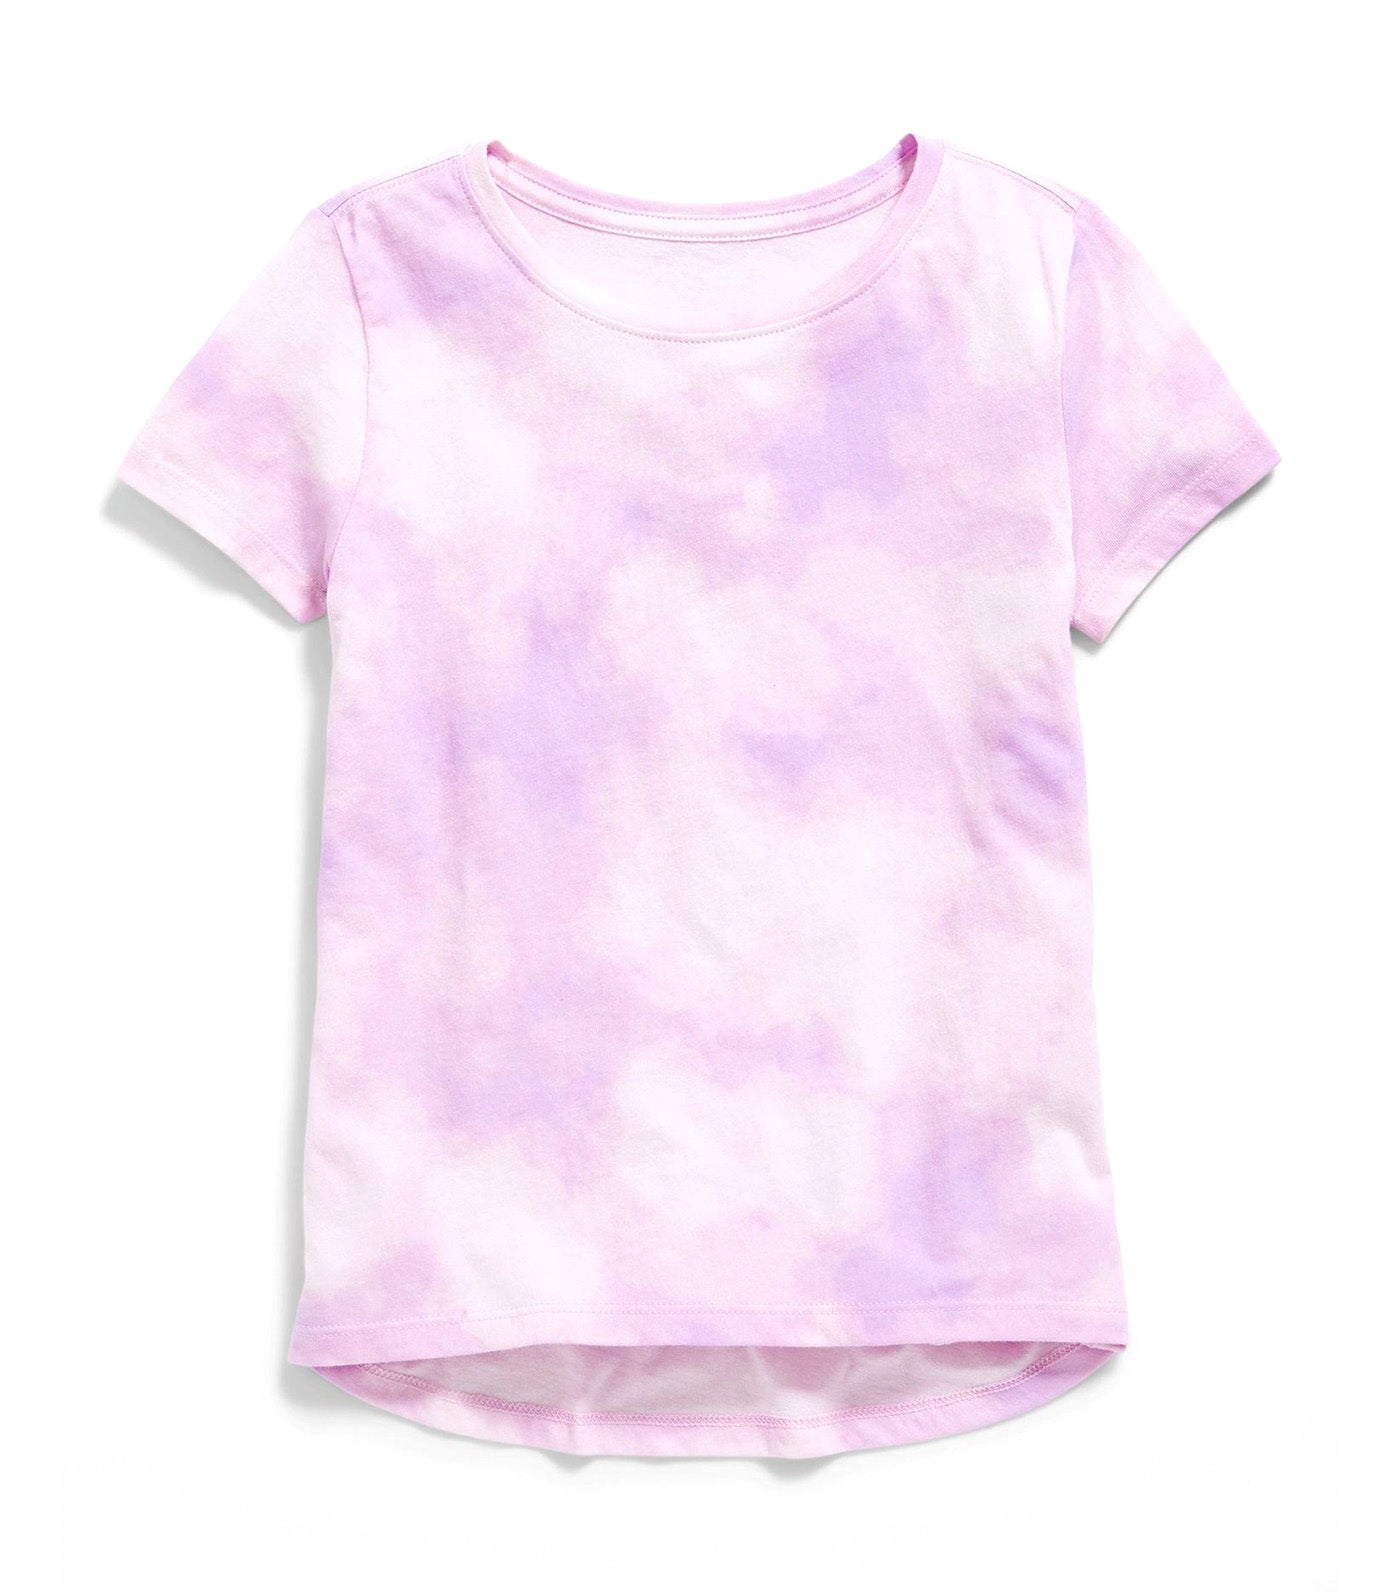 Softest Short-Sleeve Printed T-Shirt for Girls Clary Sage